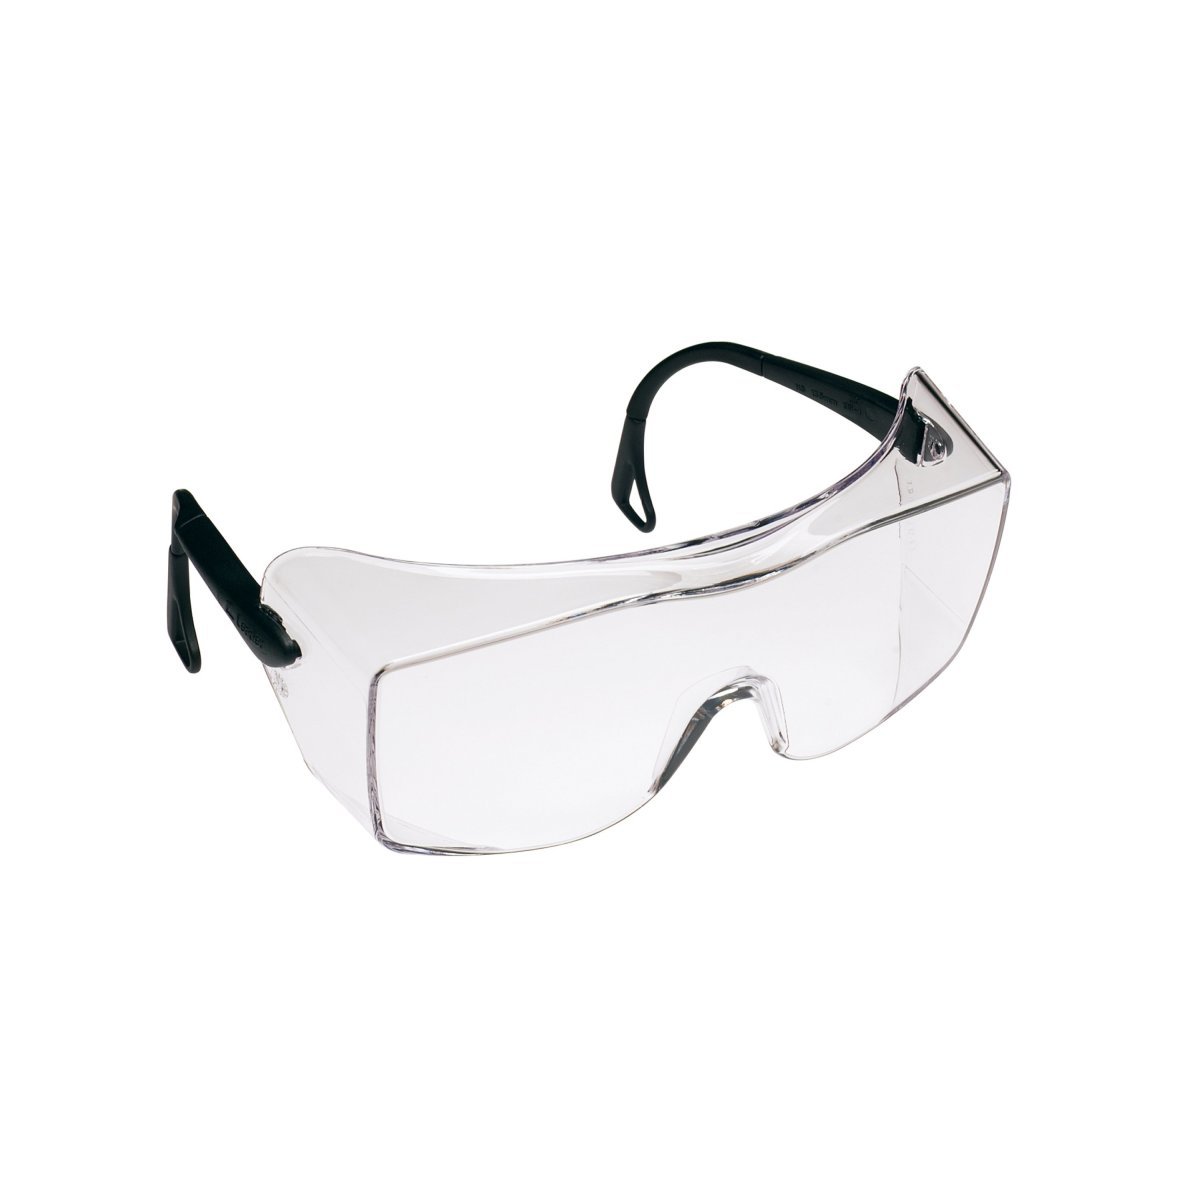 3M™ OX™ Protective Eyewear 2000, 12166-00000-20 Clear Anti-Fog Lens, Black Secure Grip Temple (Availability restrictions apply.)